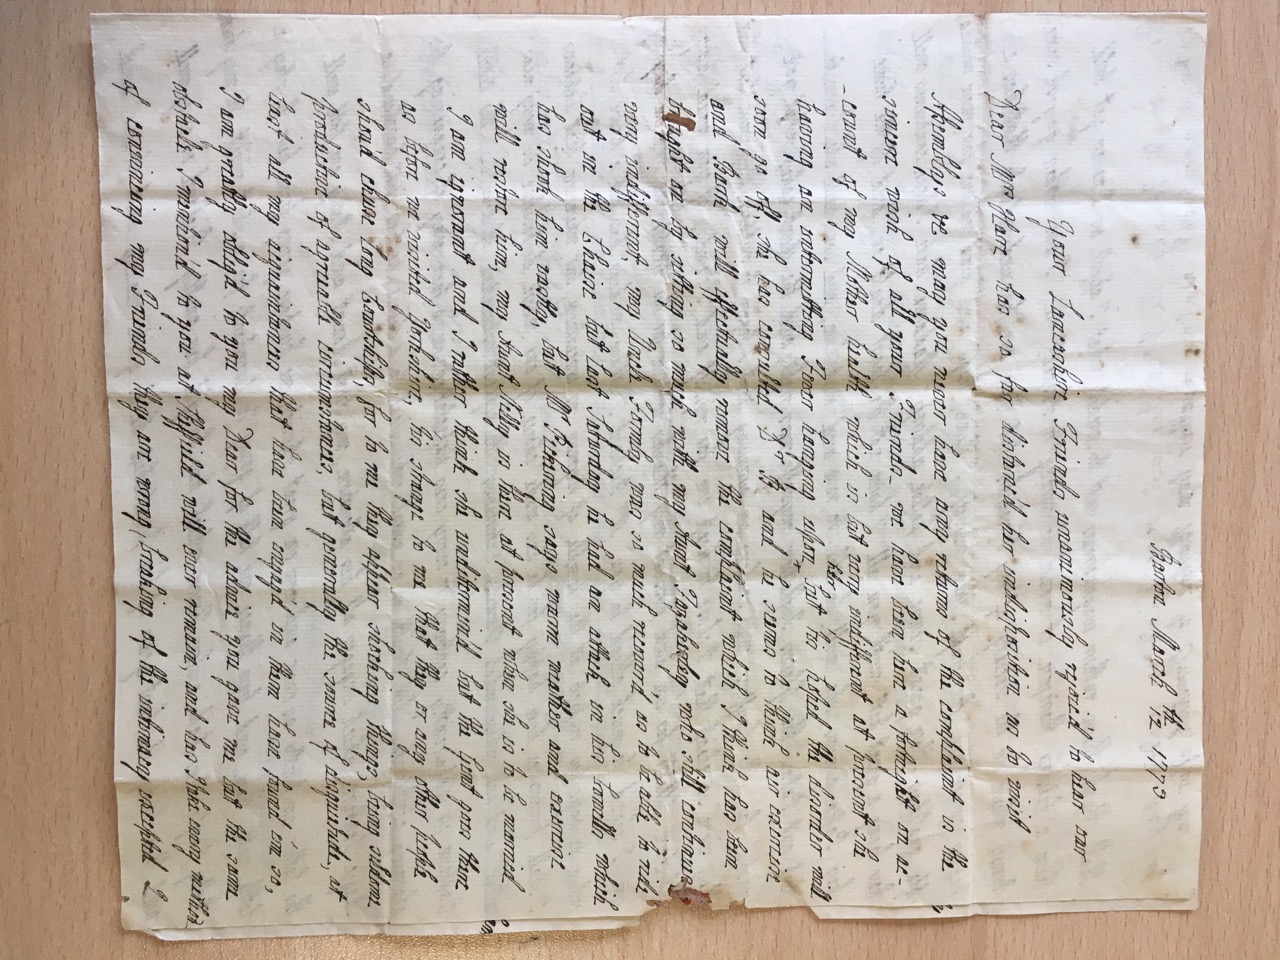 Image #1 of letter: J[enny] Brownsword to Ann Hare, 12 March 1773